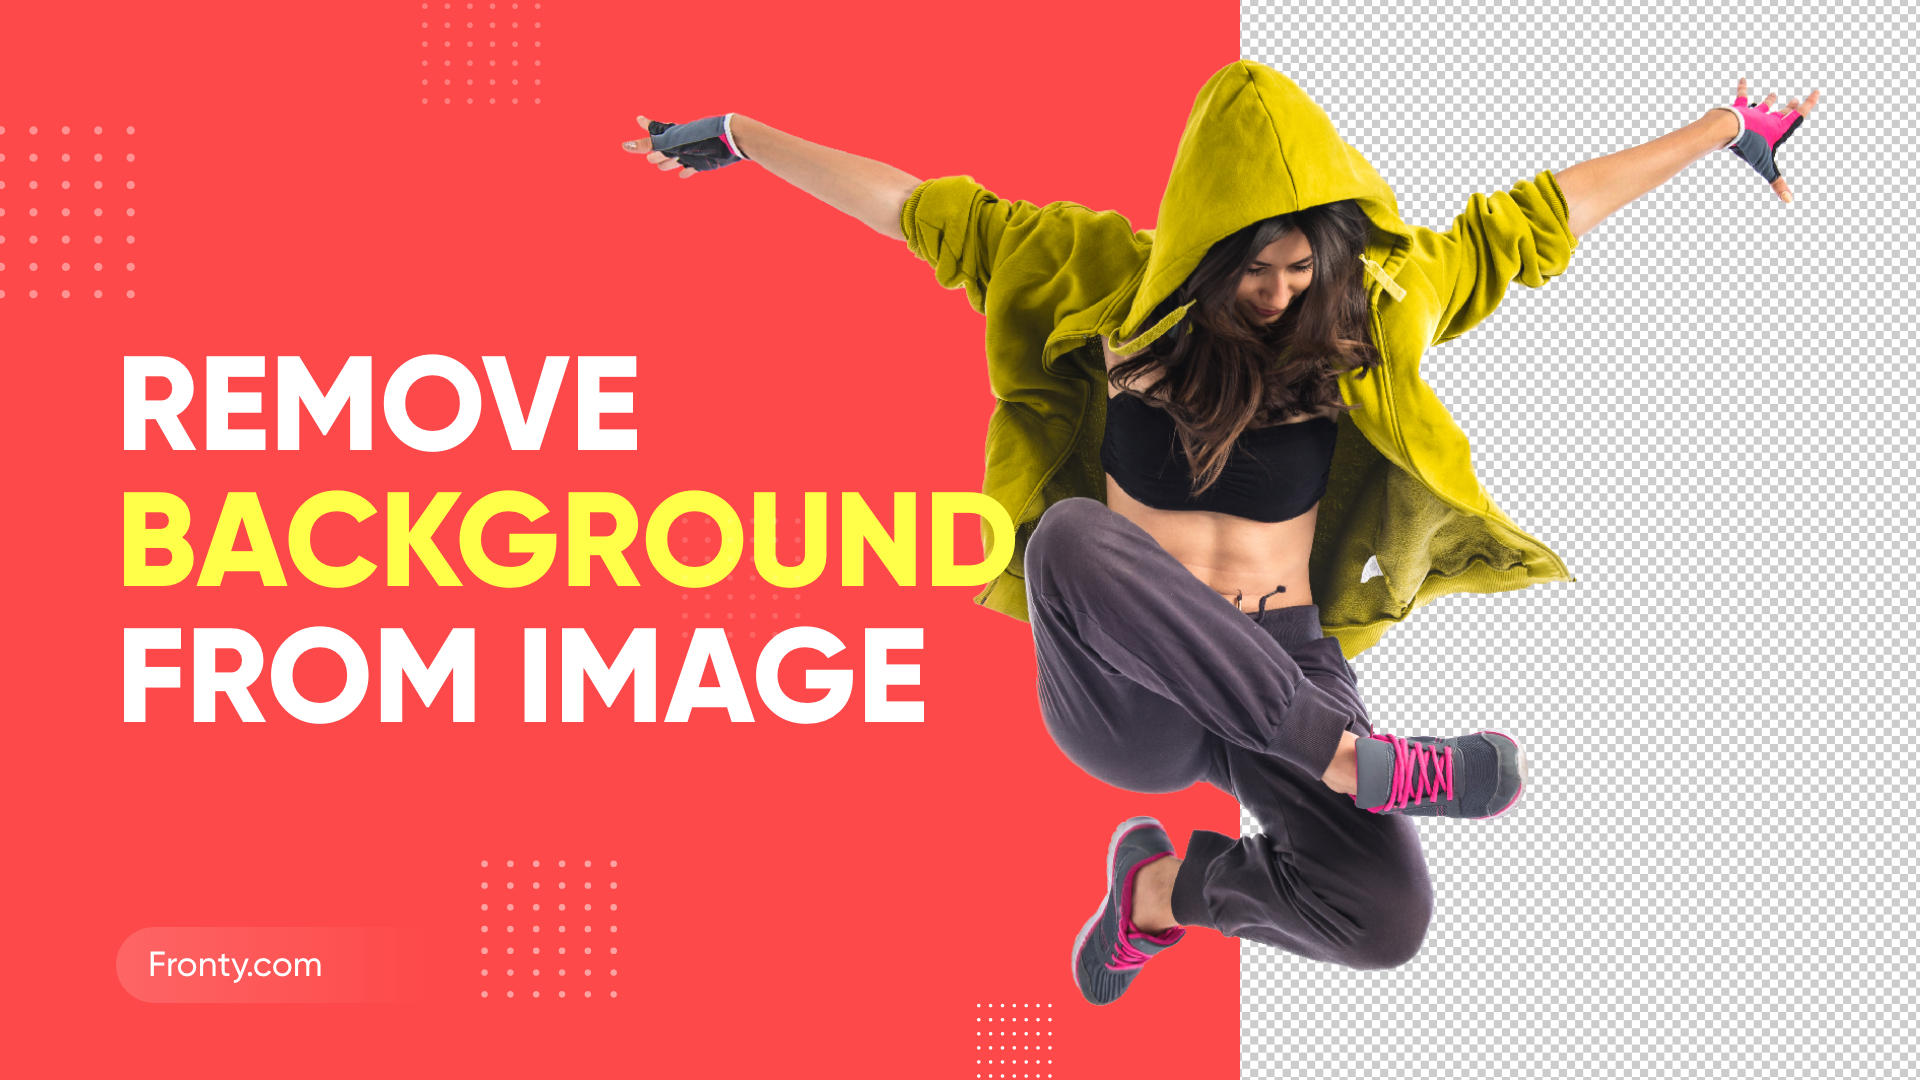 5 Tools to Remove Image Background - Fronty